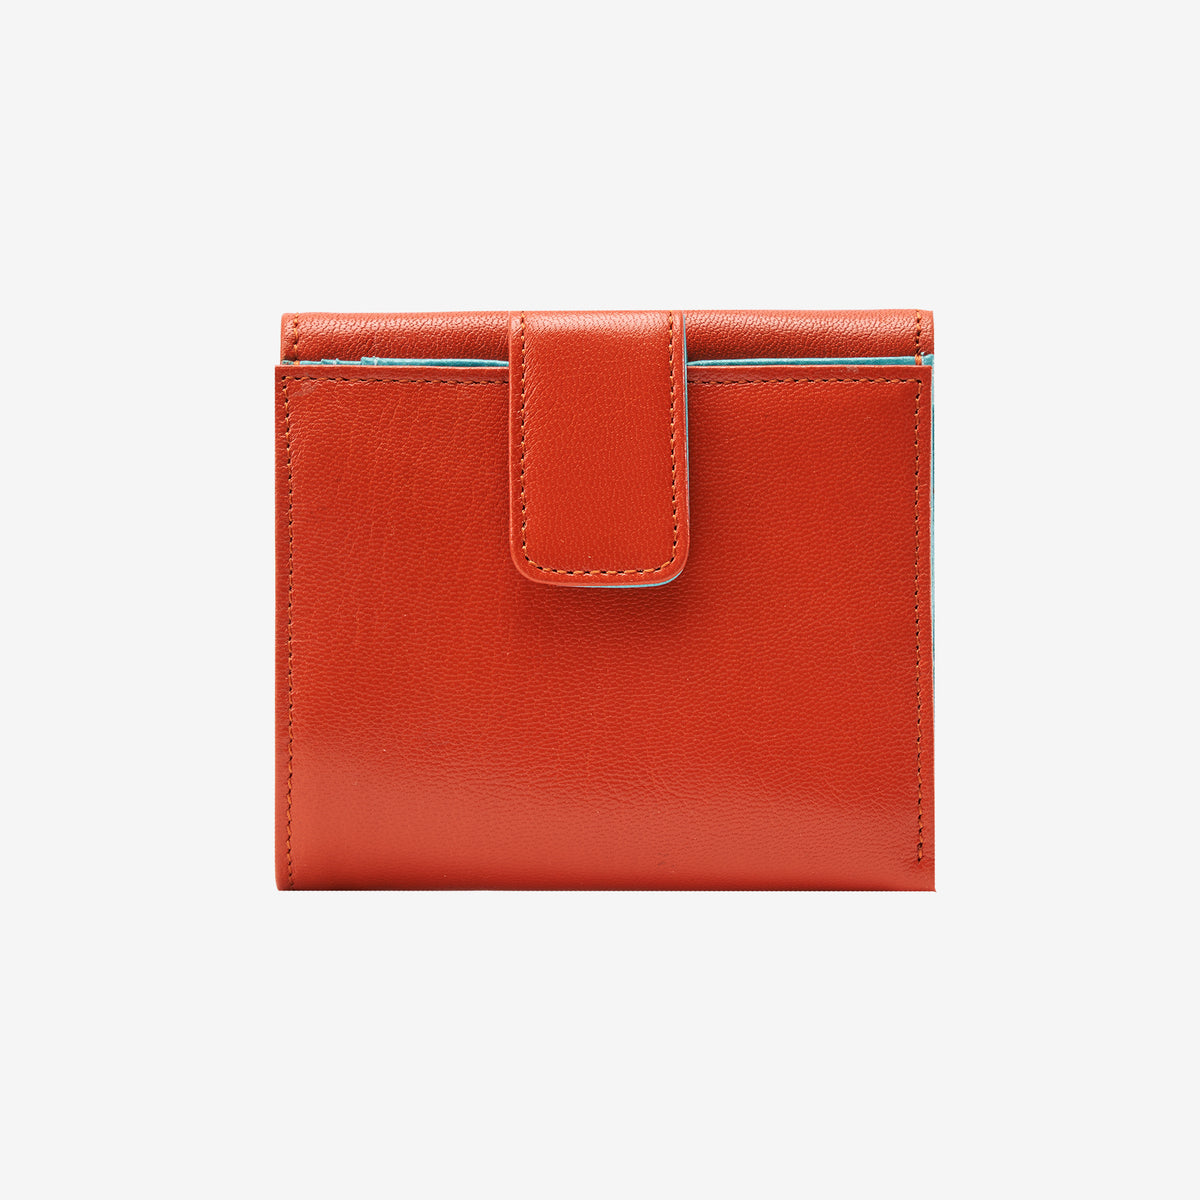     tusk-461-siam-leather-indexer-wallet-orange-and-sky-back